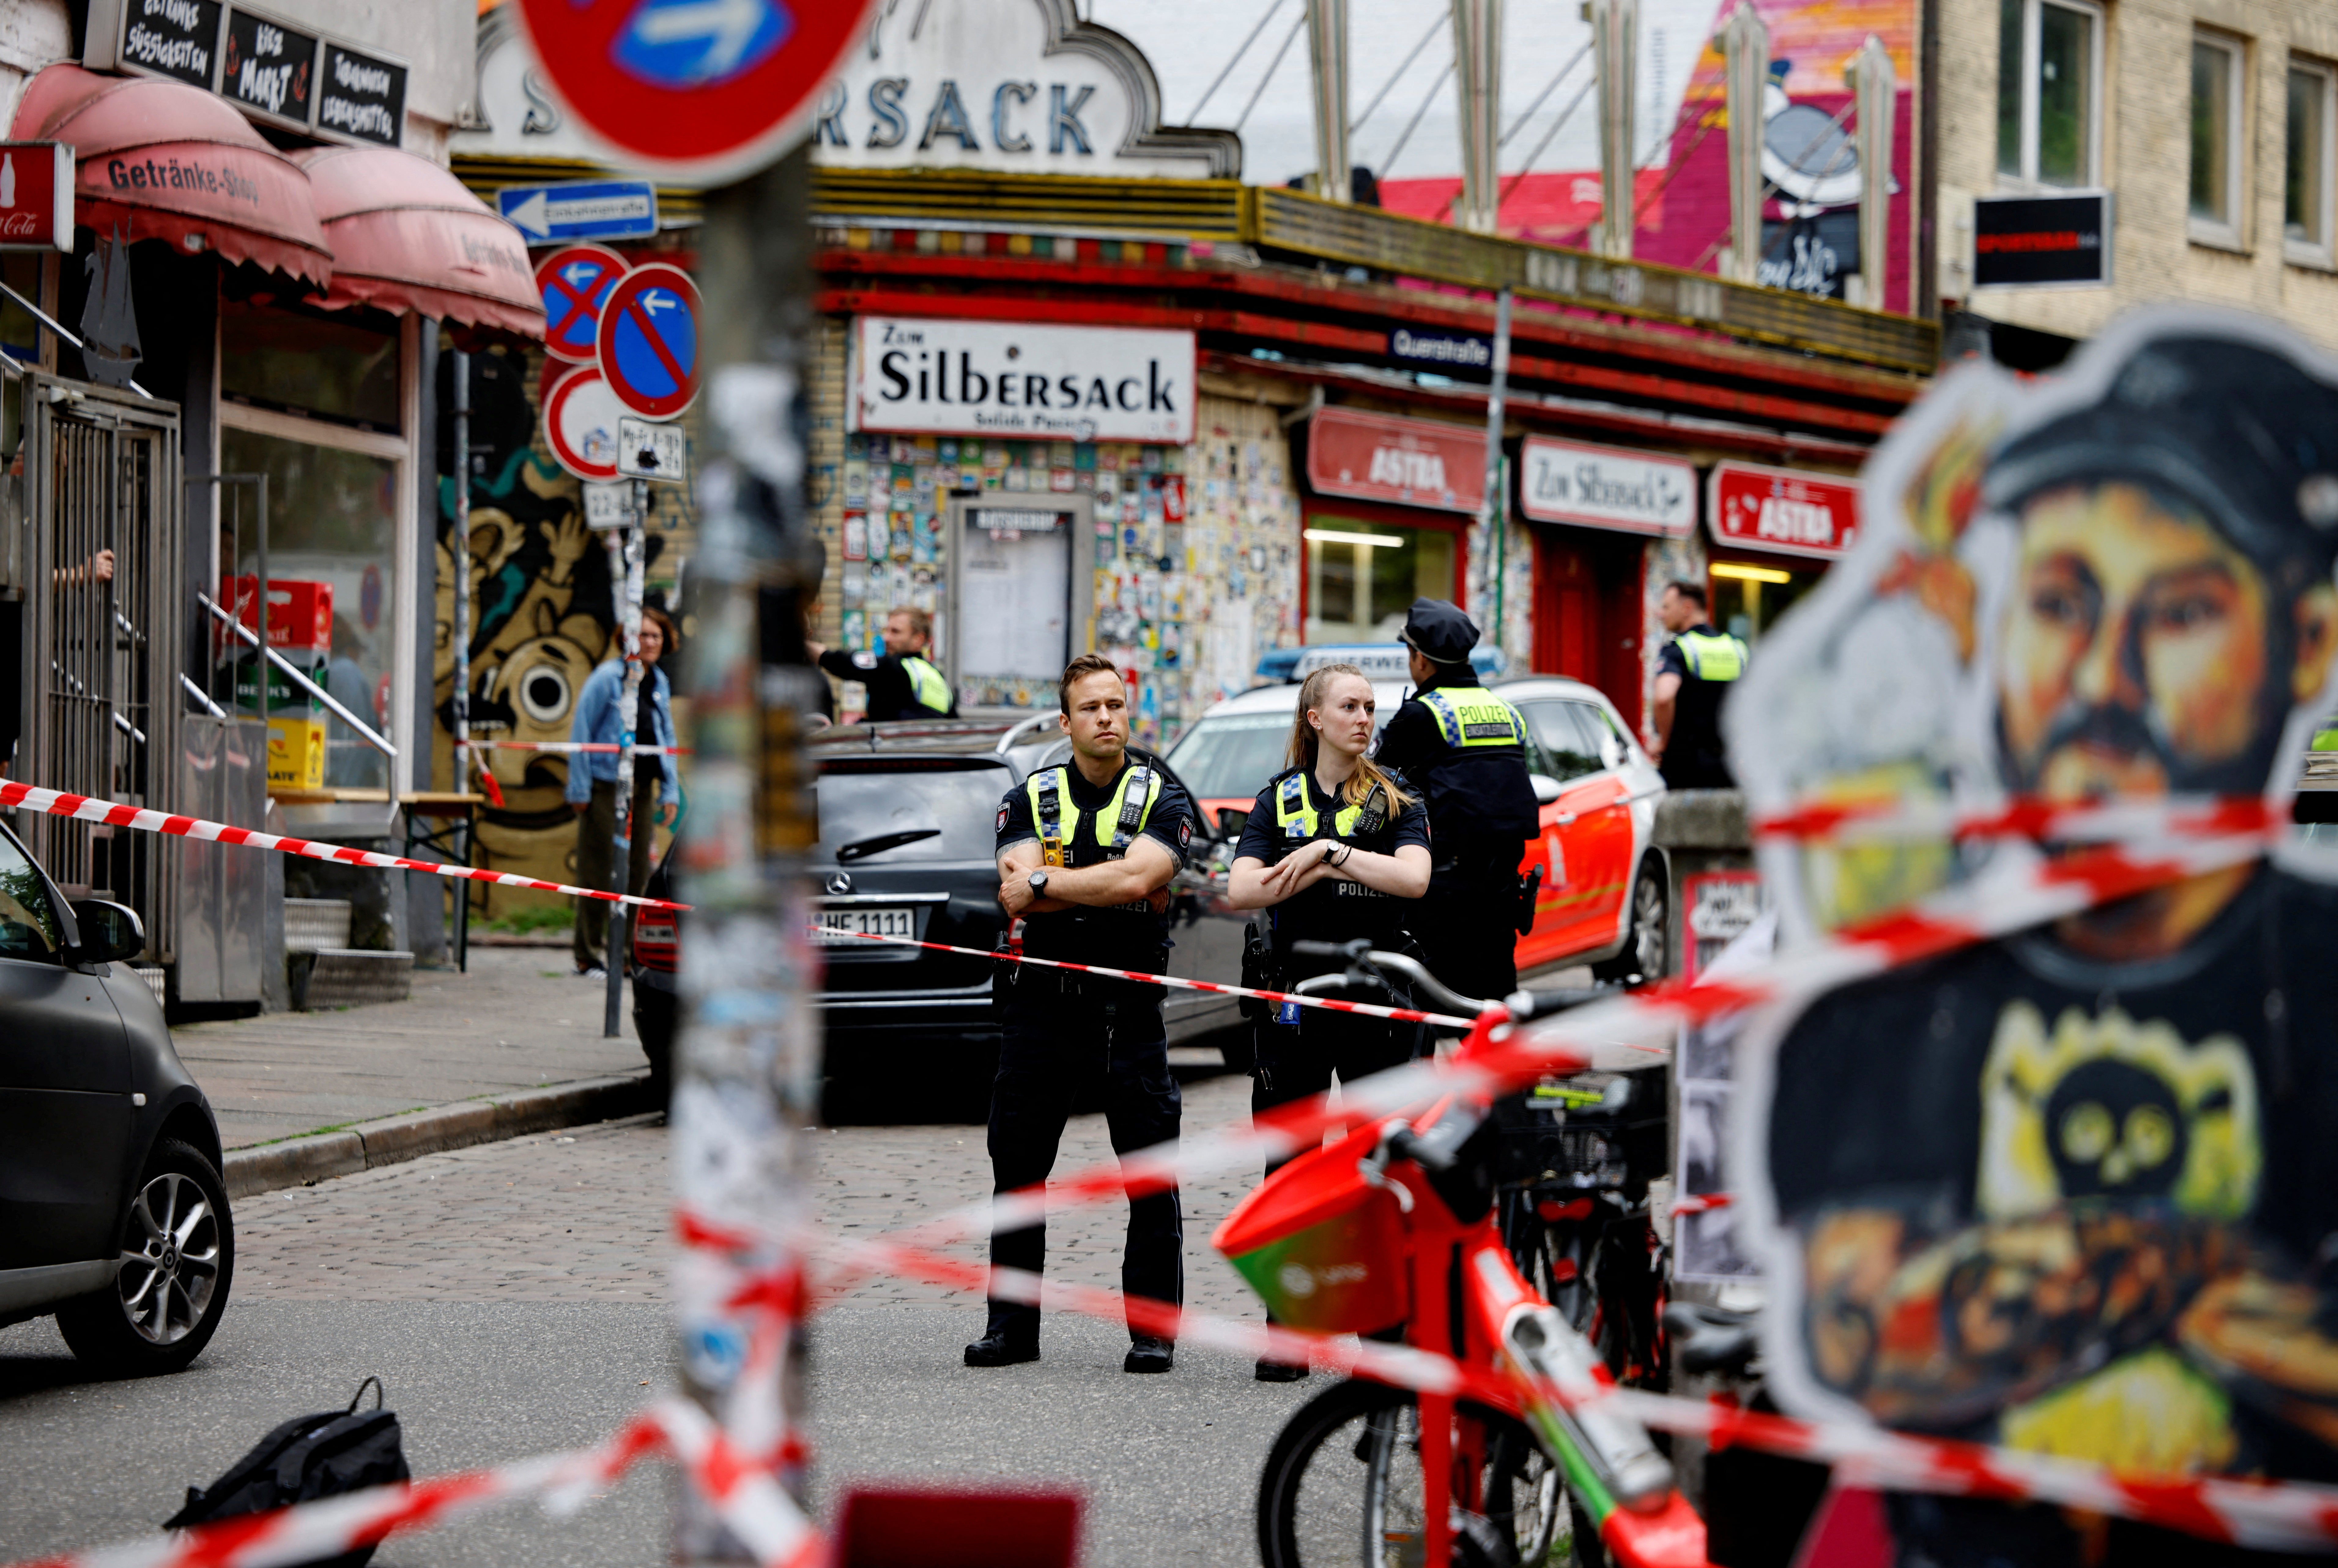 Police at the scene after a man was shot in the St Pauli district of Hamburg